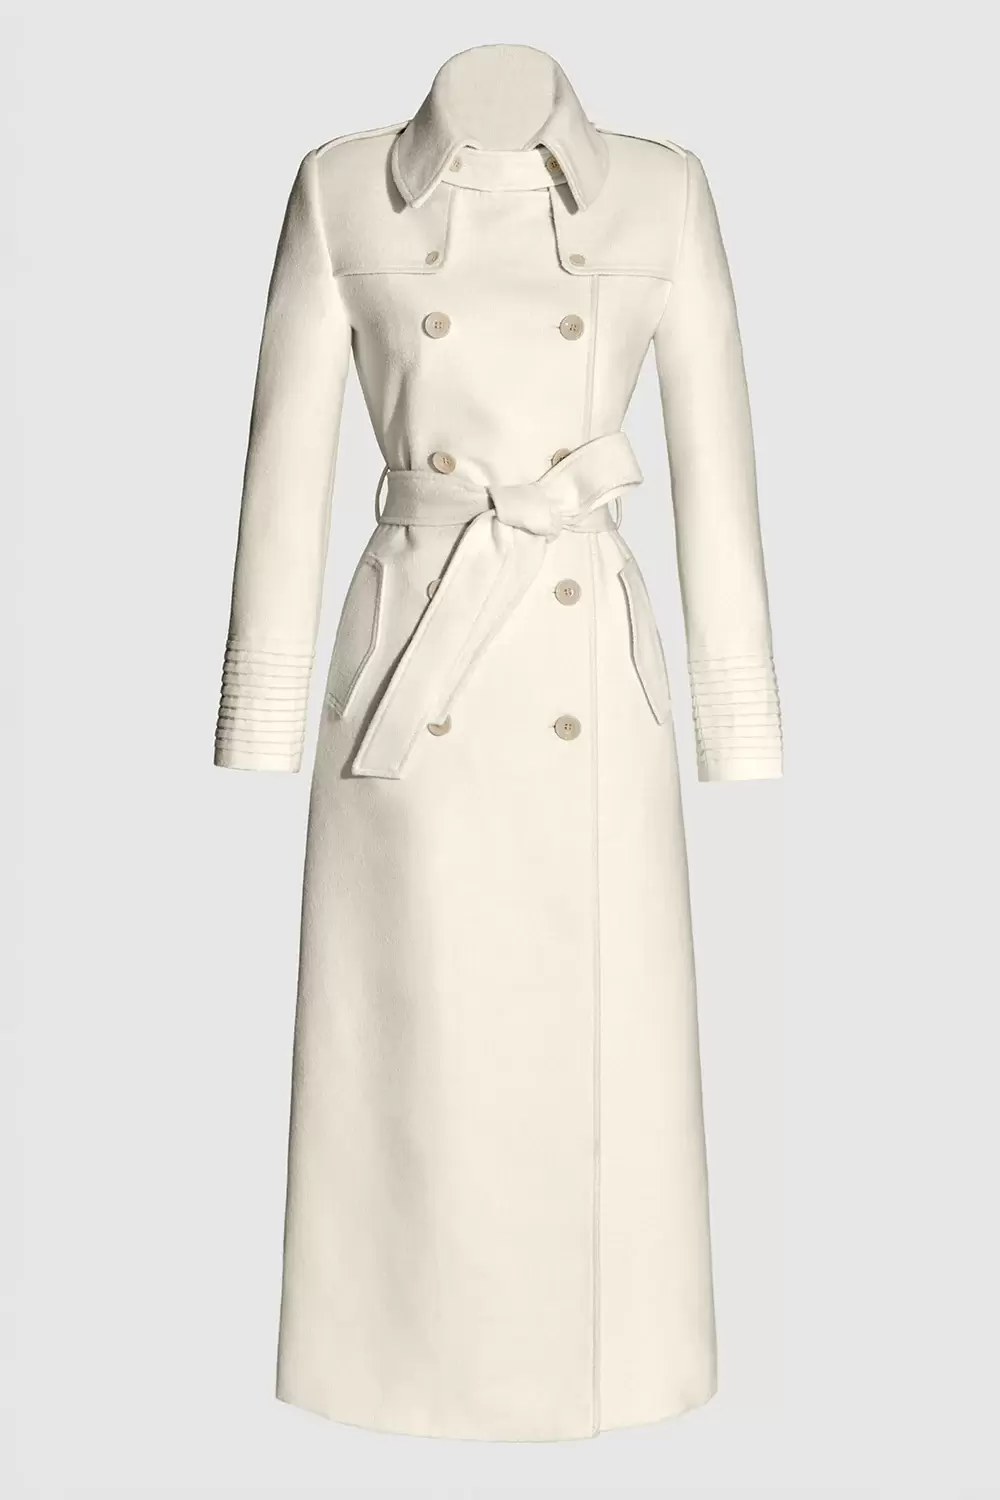 Sentaler 'The New' Maxi Trench Coat in Ivory